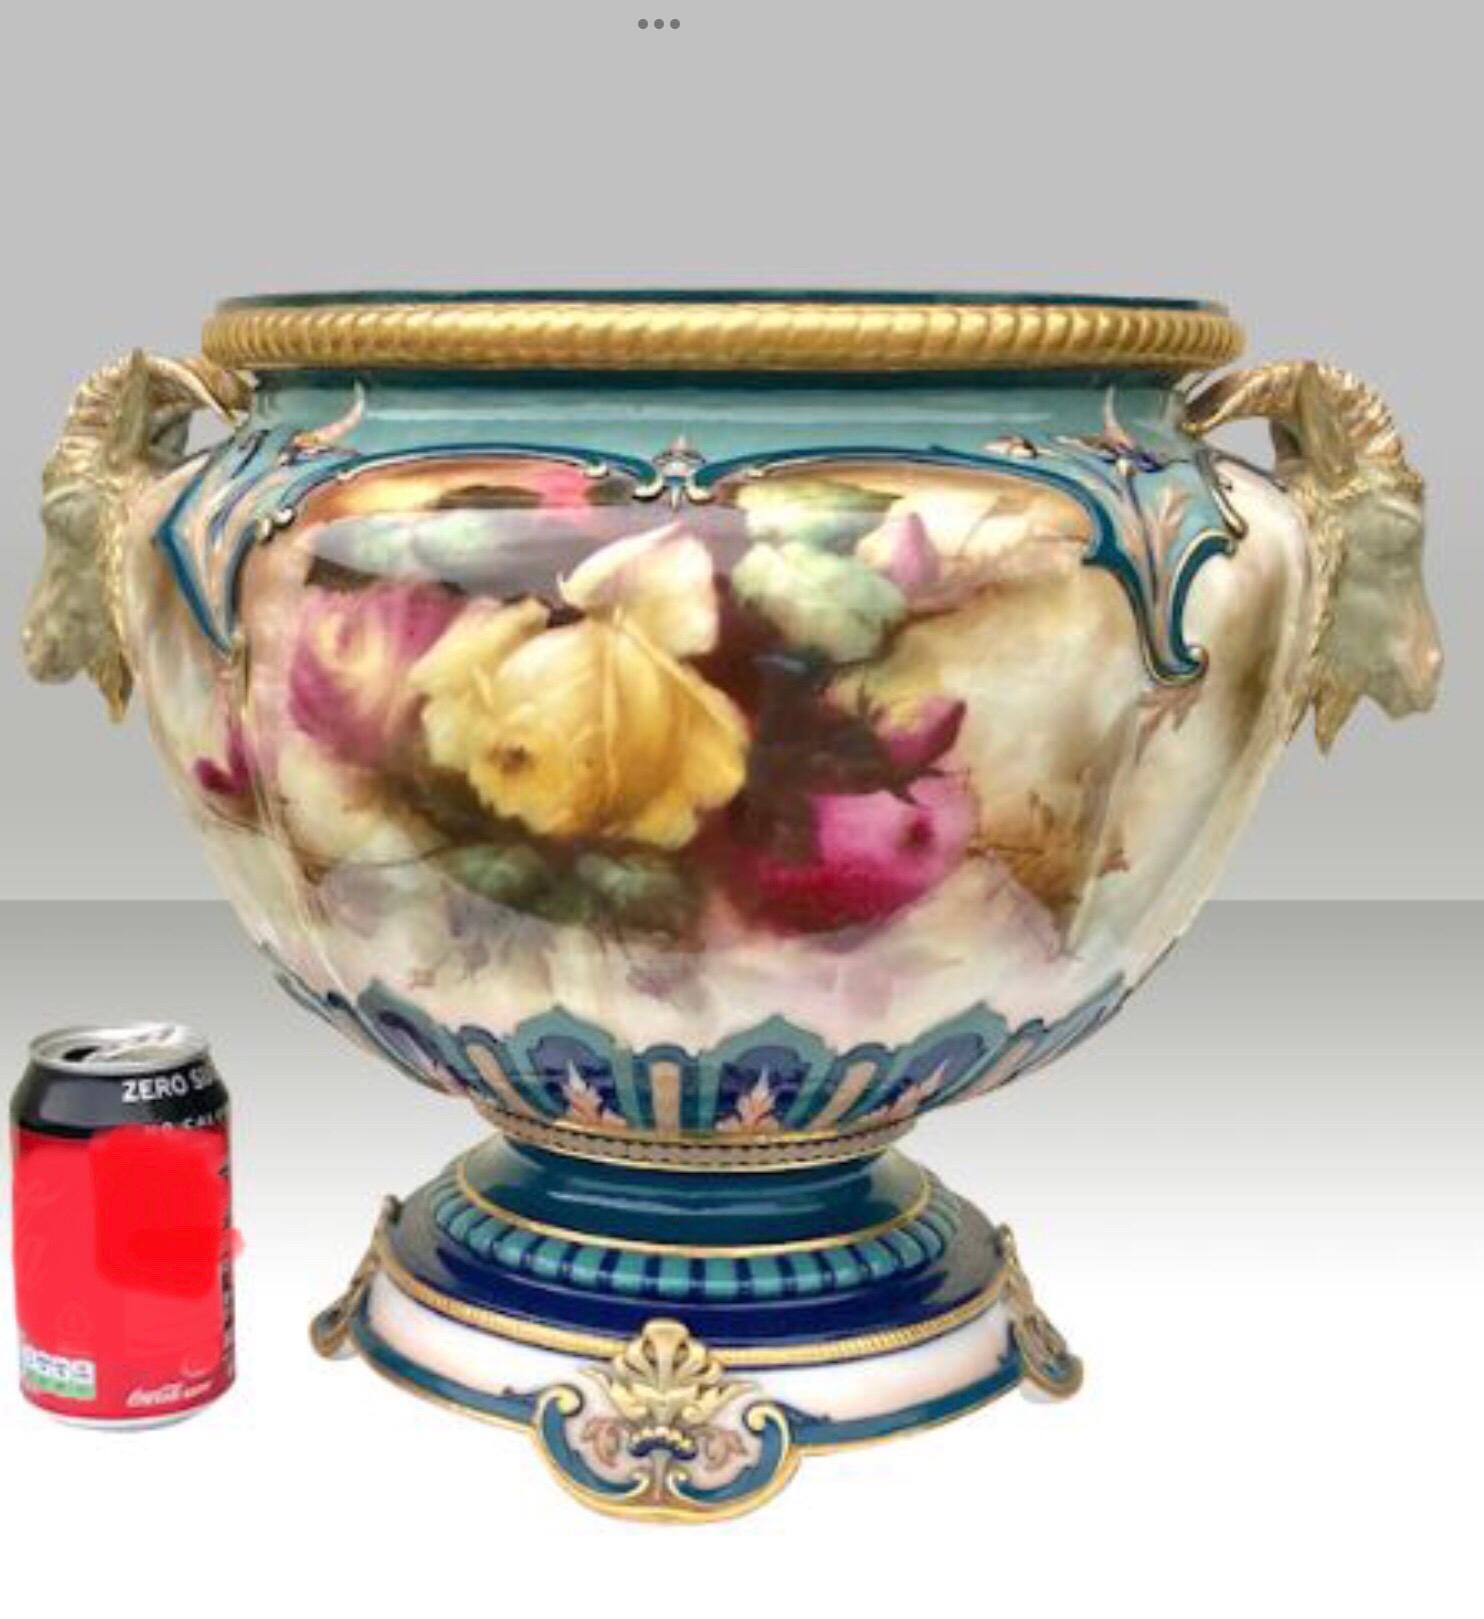 Magnificent Large Antique Royal Worcester Footed Jardiniere,Bowl,Vase,Beautifully Hand Painted Front and Rear With Red,Yellow Roses and Foliage.Surmounted Each Side With Horned Rams Heads.
Stunning Condition,Modelled by Hadley,Painted And Signed By